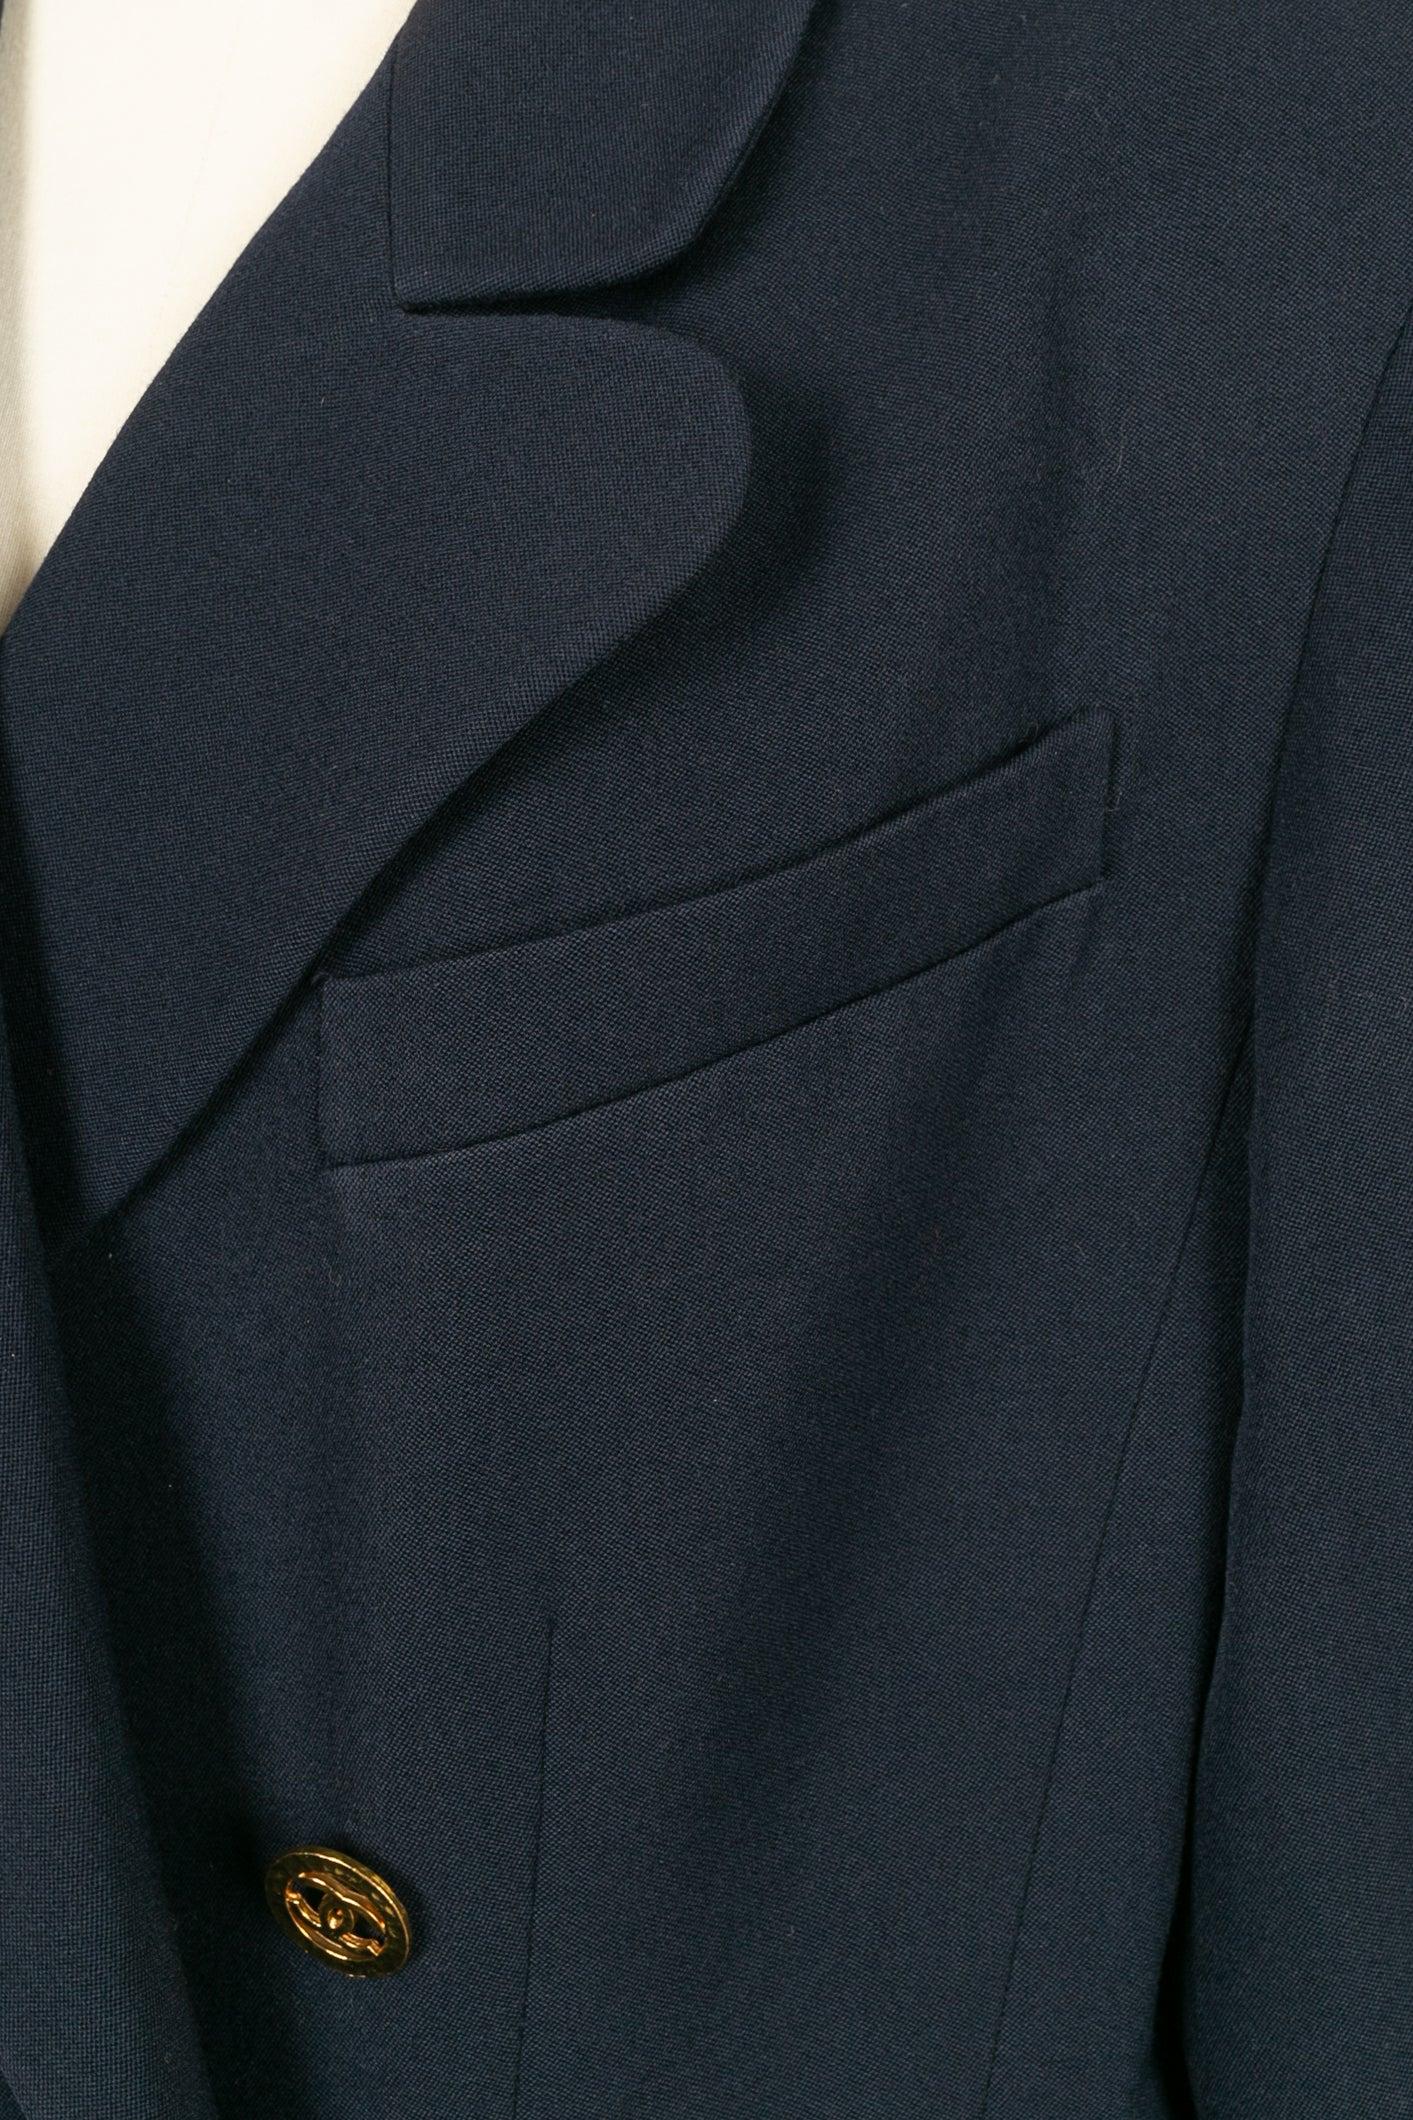 Chanel Navy Blue Wool Jacket with a Silk Lining, 1990s For Sale 1